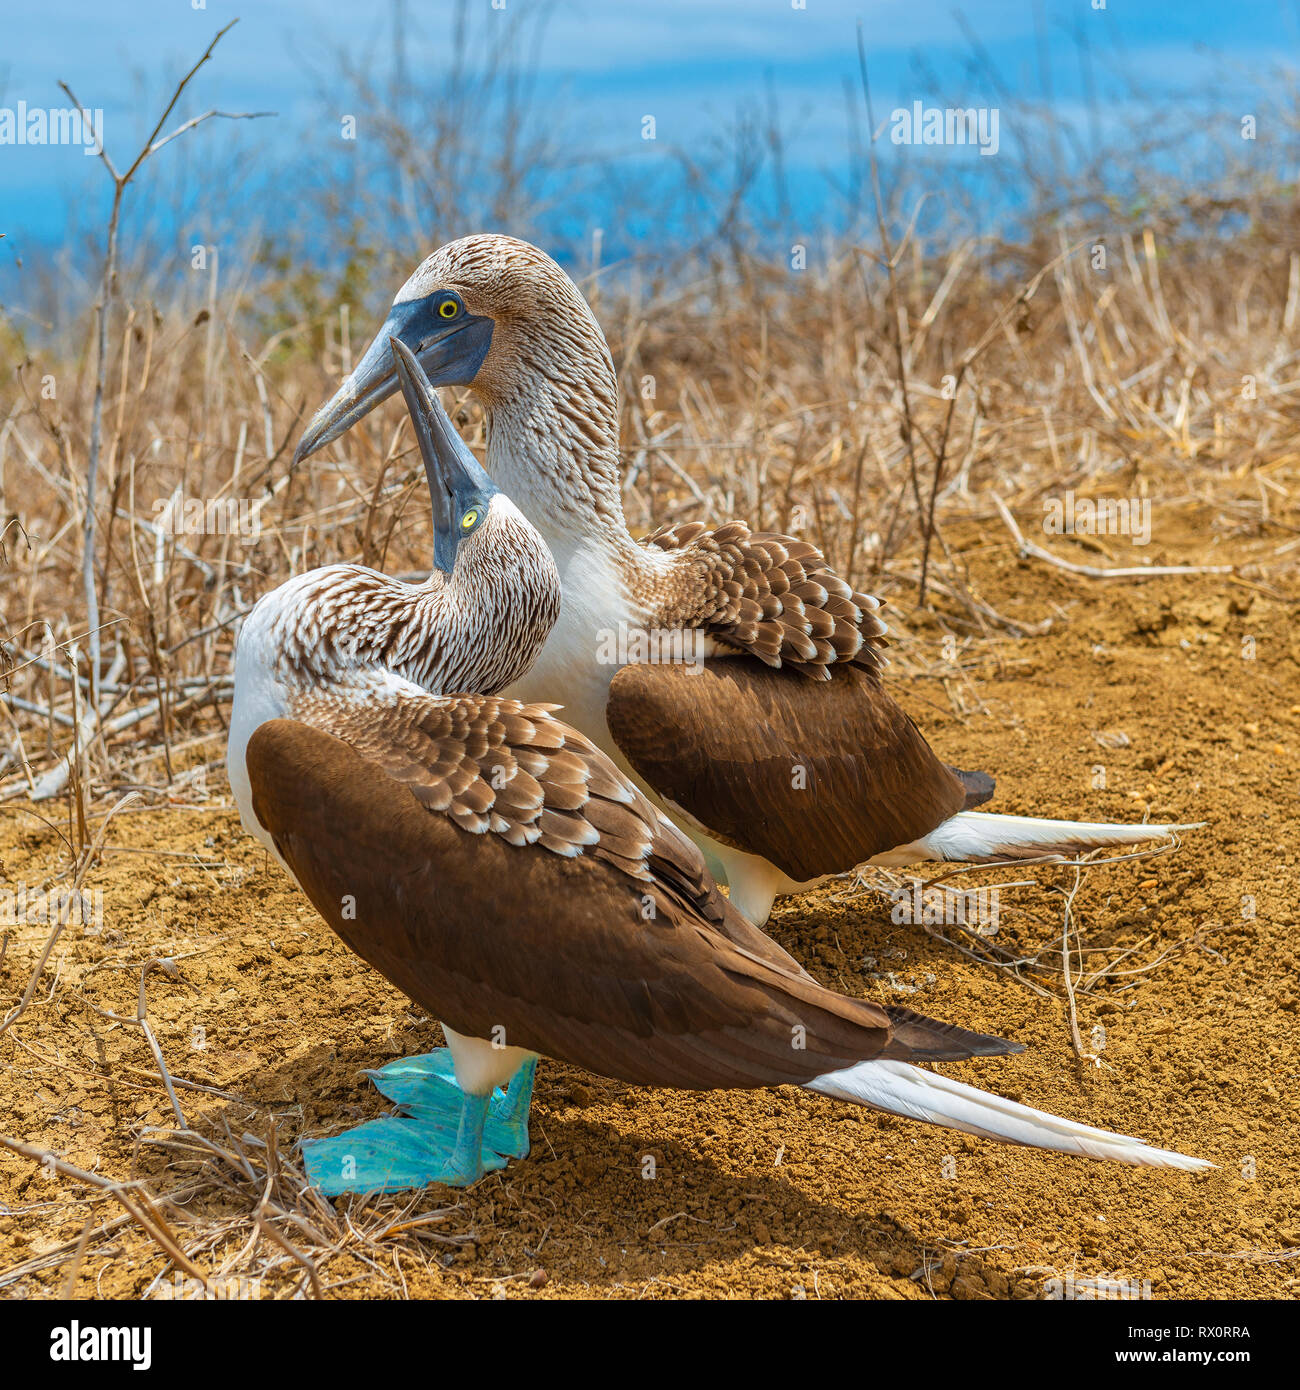 Square photograph of blue footed boobies during their mating dance on Espanola Island, Galapagos Islands National Park, Pacific Ocean, Ecuador. Stock Photo